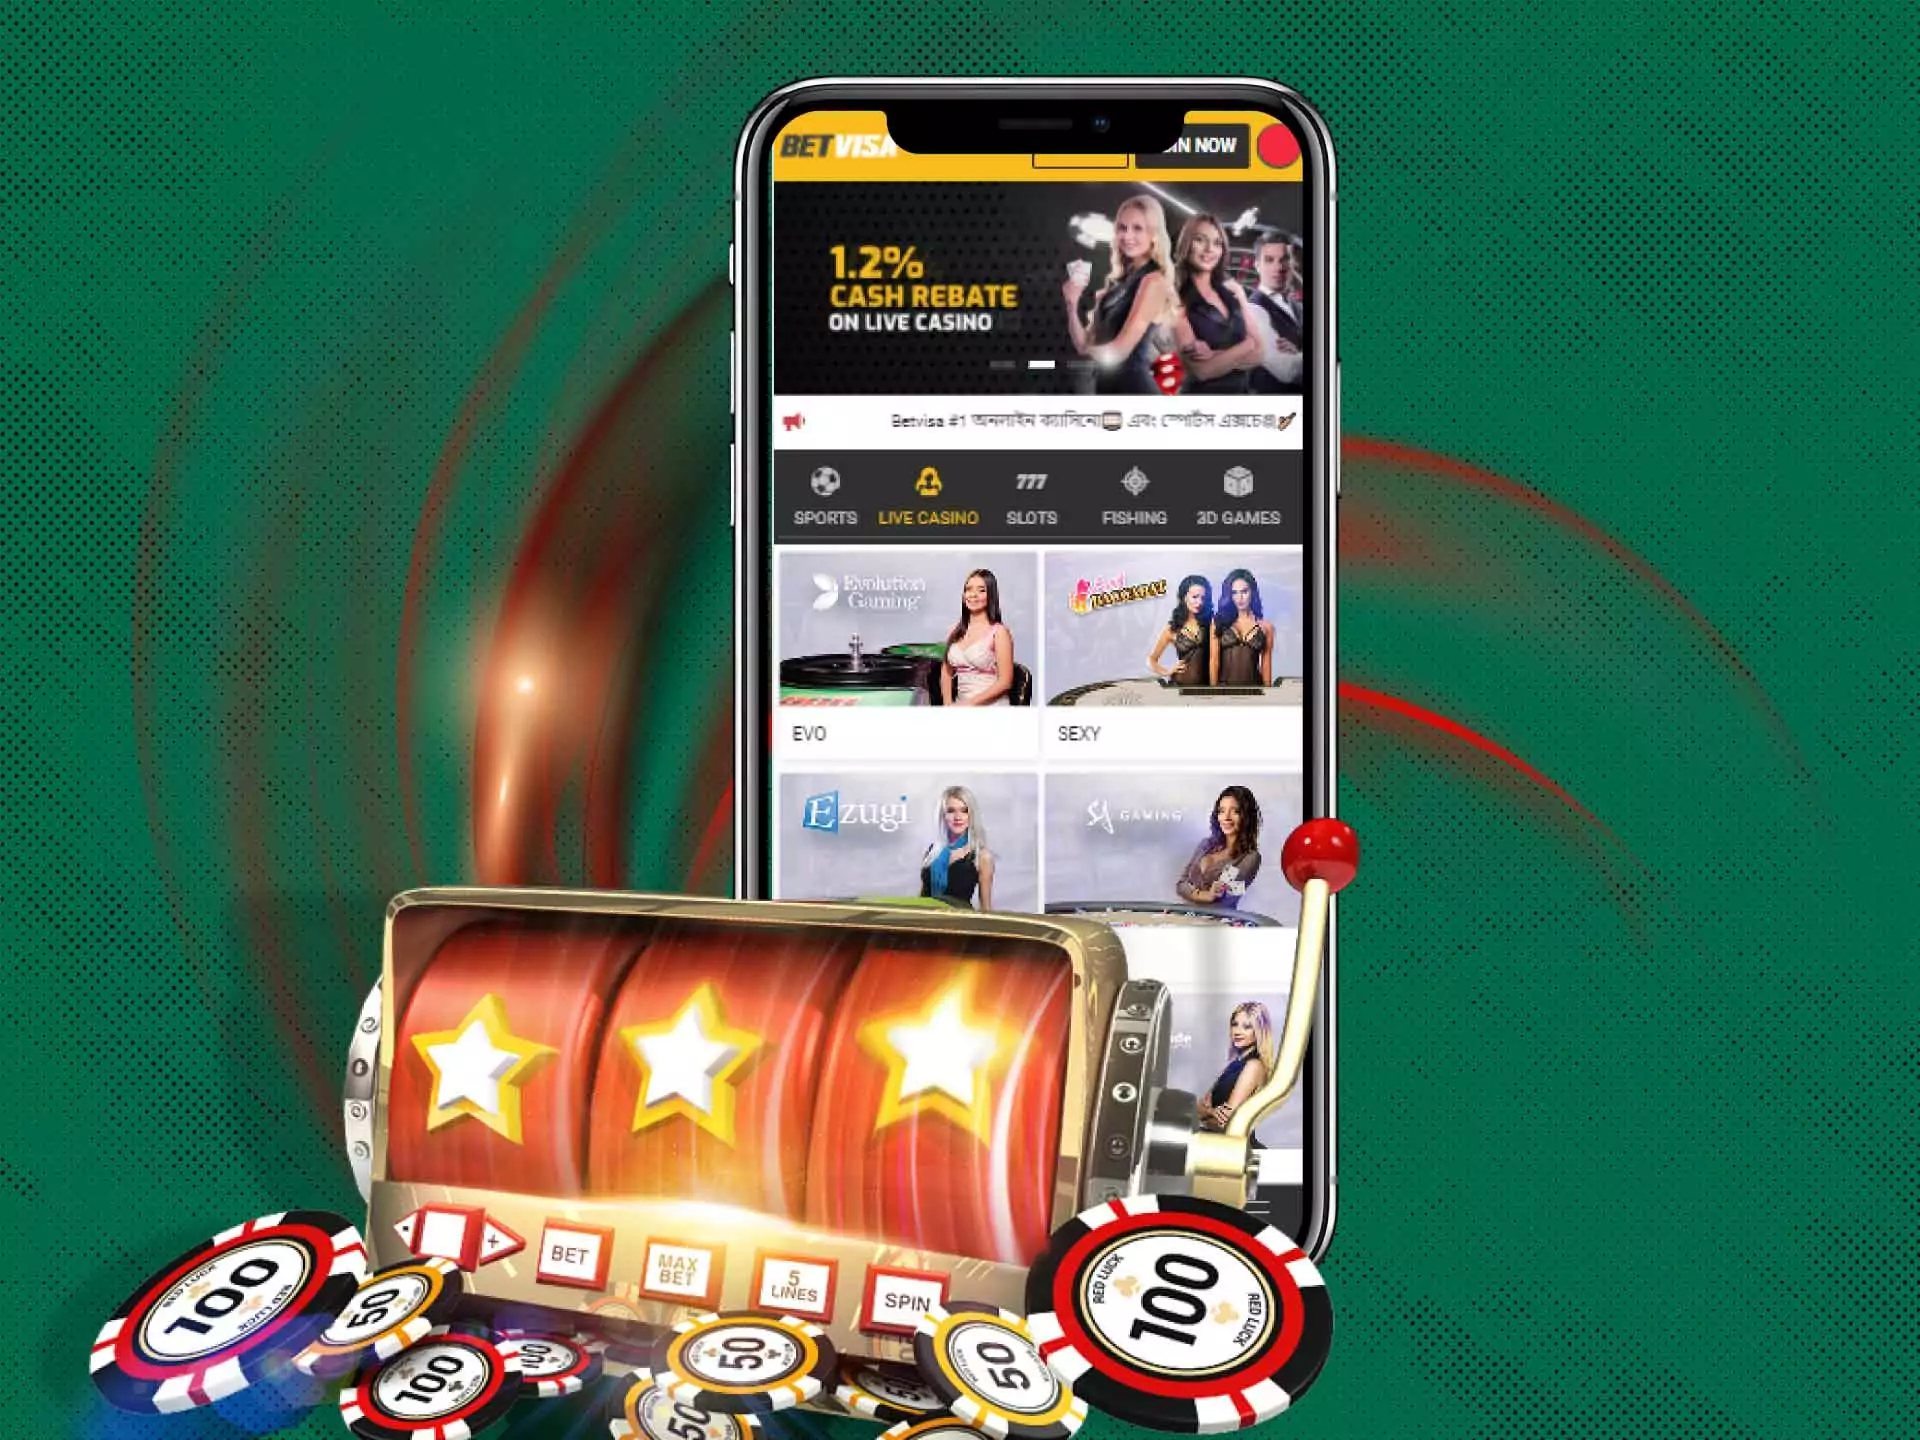 You can play casino games in the Betvisa app.